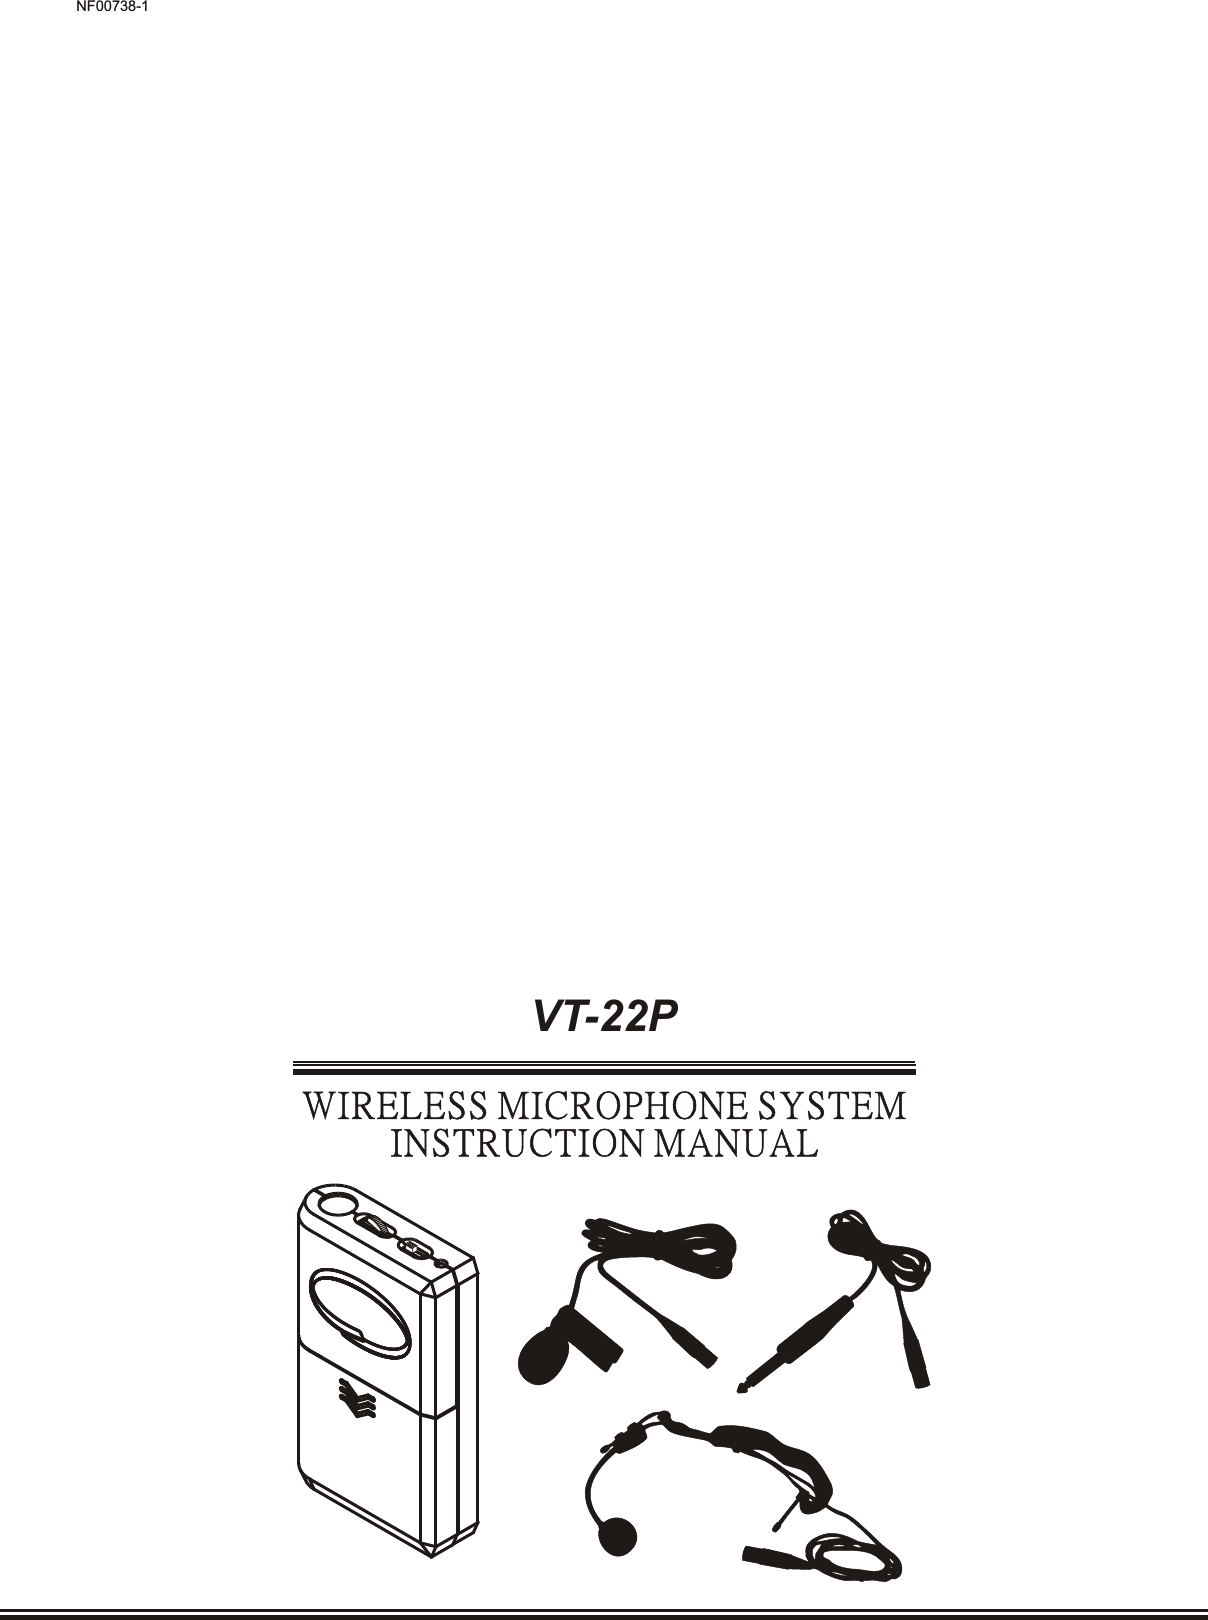 VT-22PNF00738-1